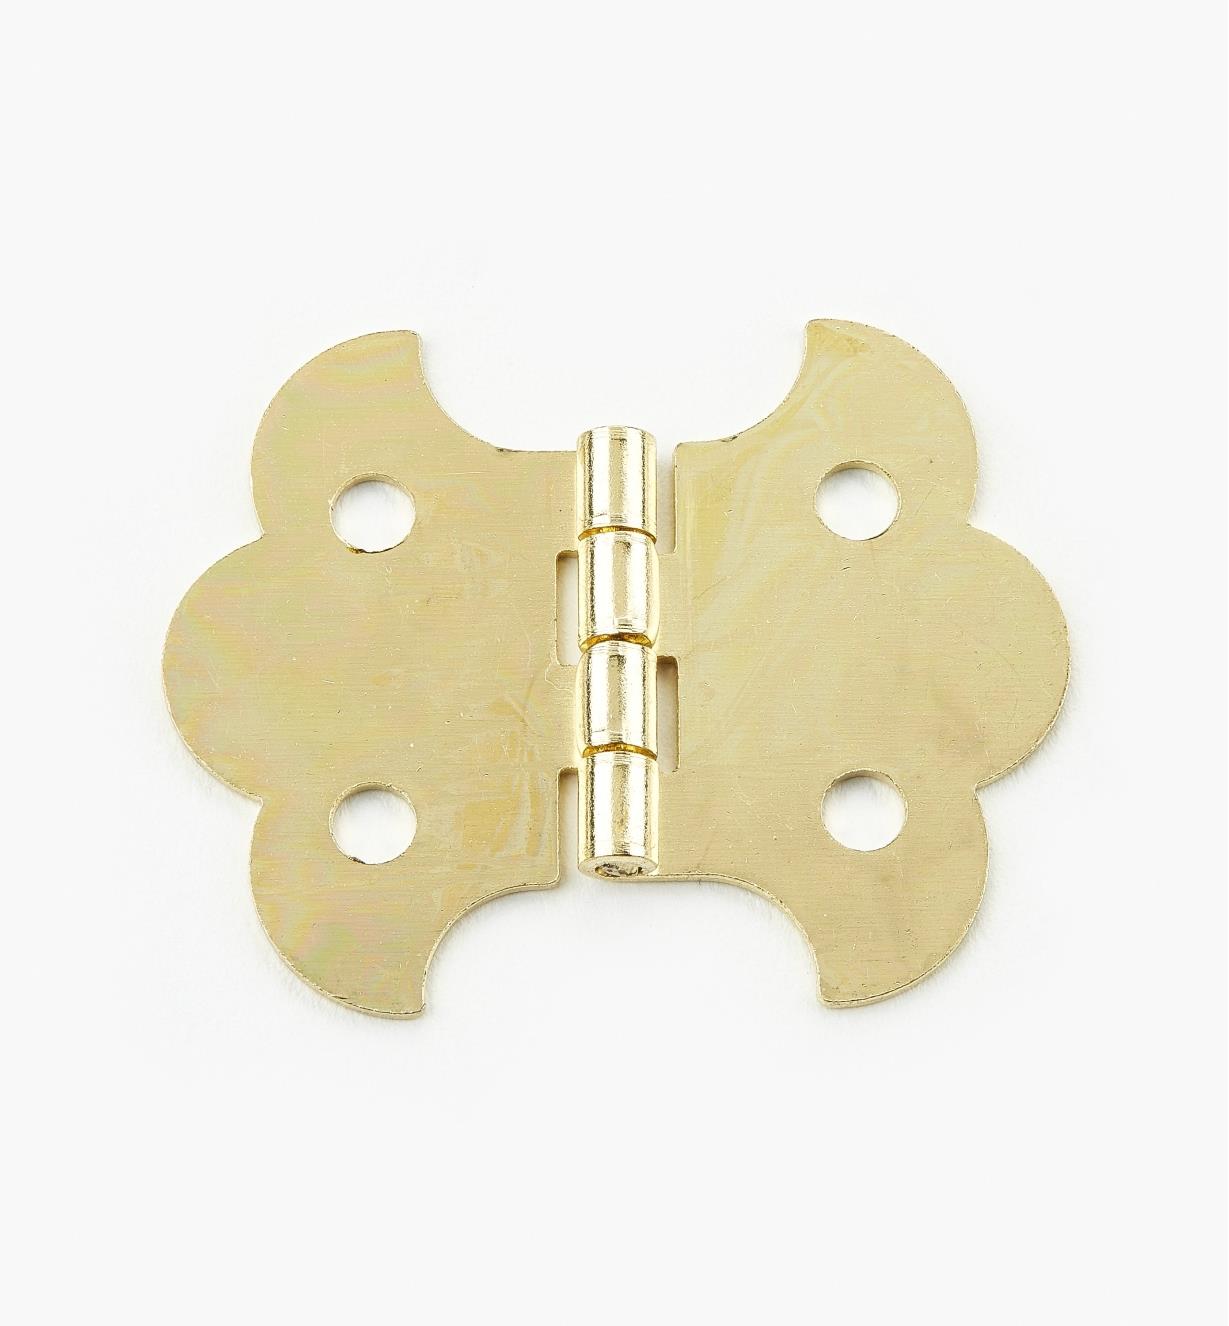 00D1220 - Brass-Plated Hinge, each